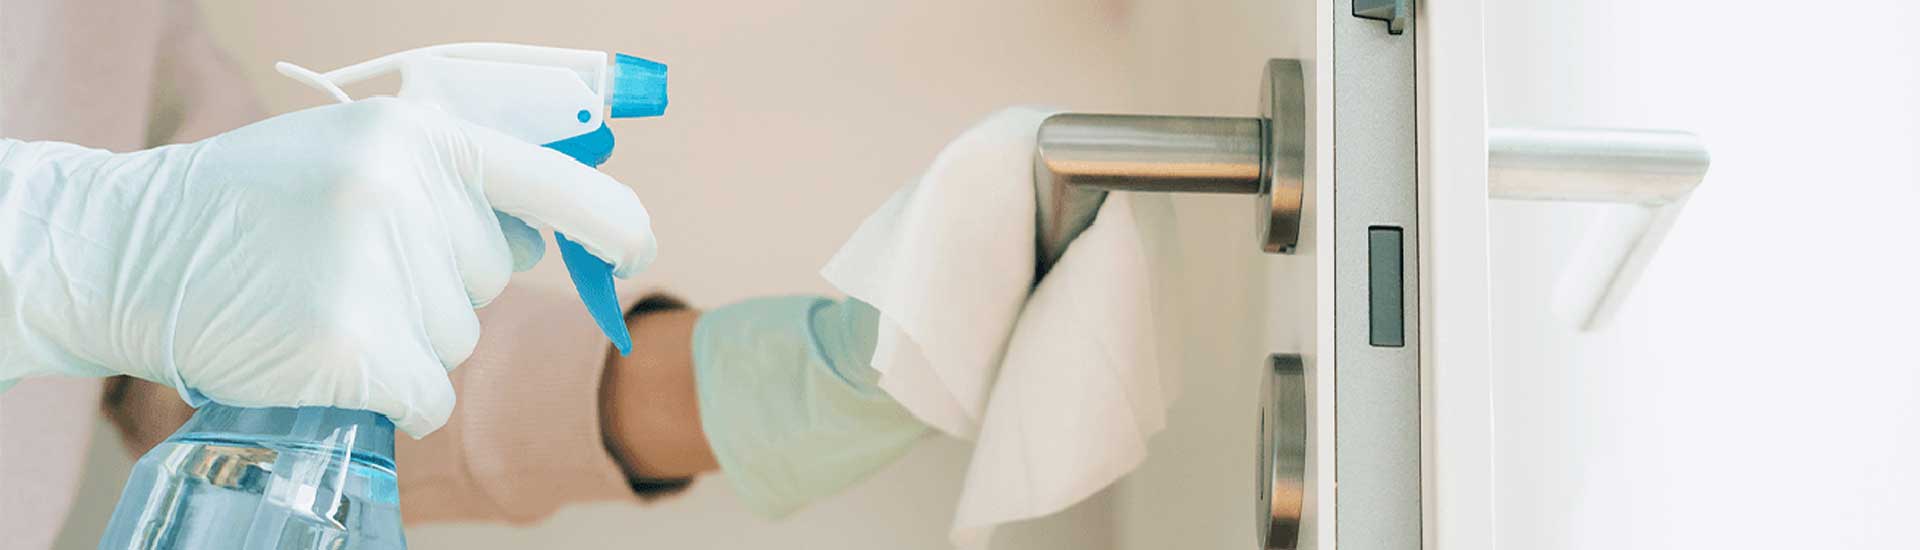 5 Appropriate Ways for Staying in Hotel Clean and Safe